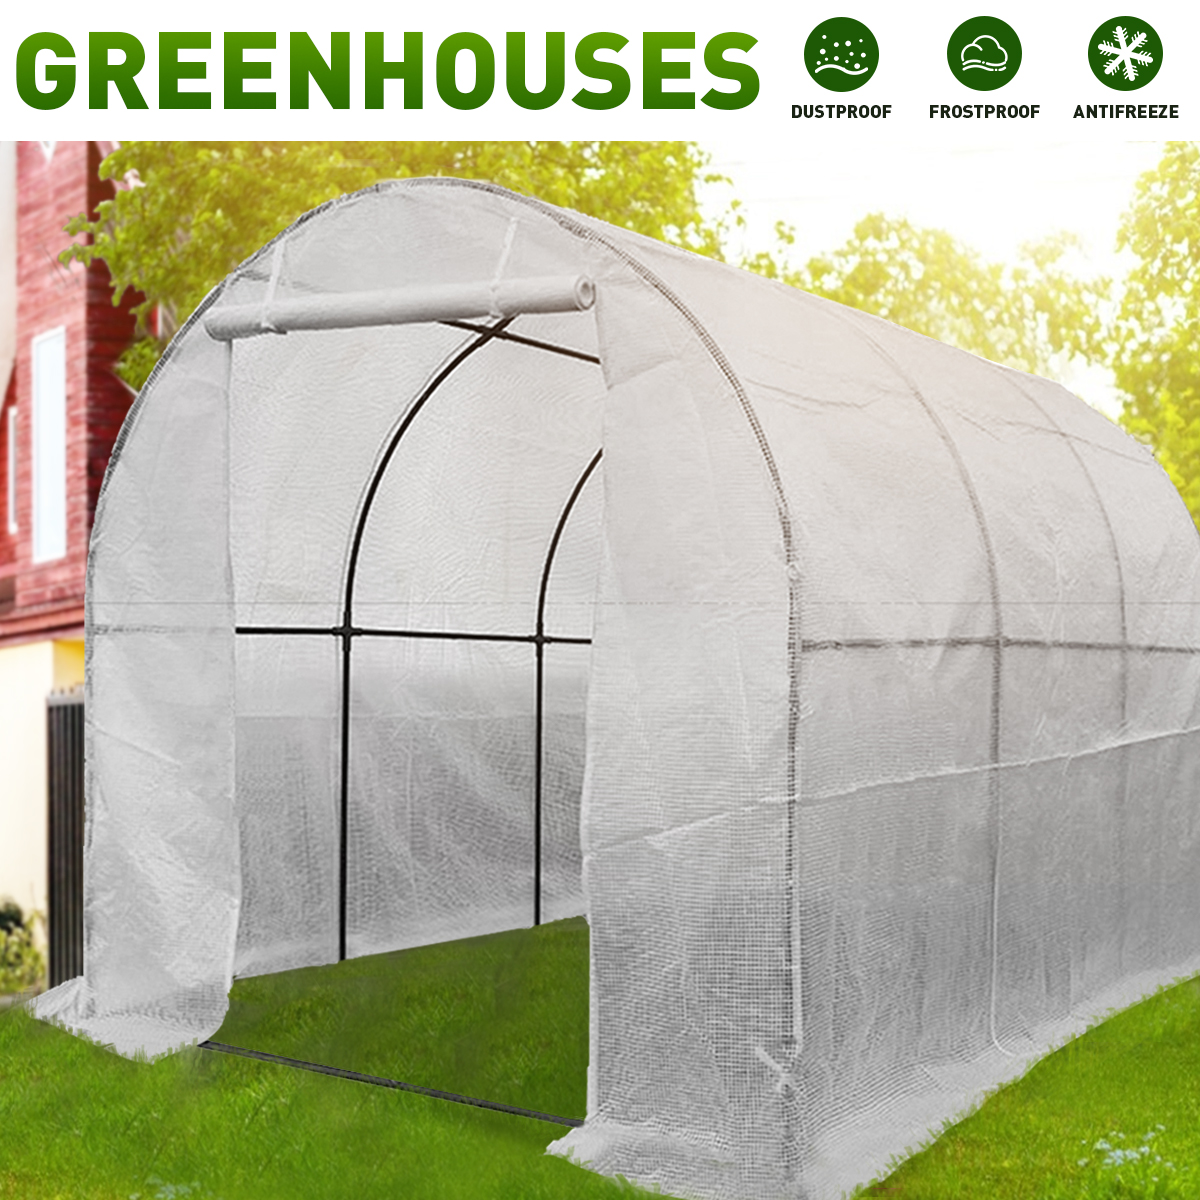 3X2X2M-Greenhouse-Planter-House-Canopy-Outdoor-Plant-Garden-Grow-Growing-House-1938344-4